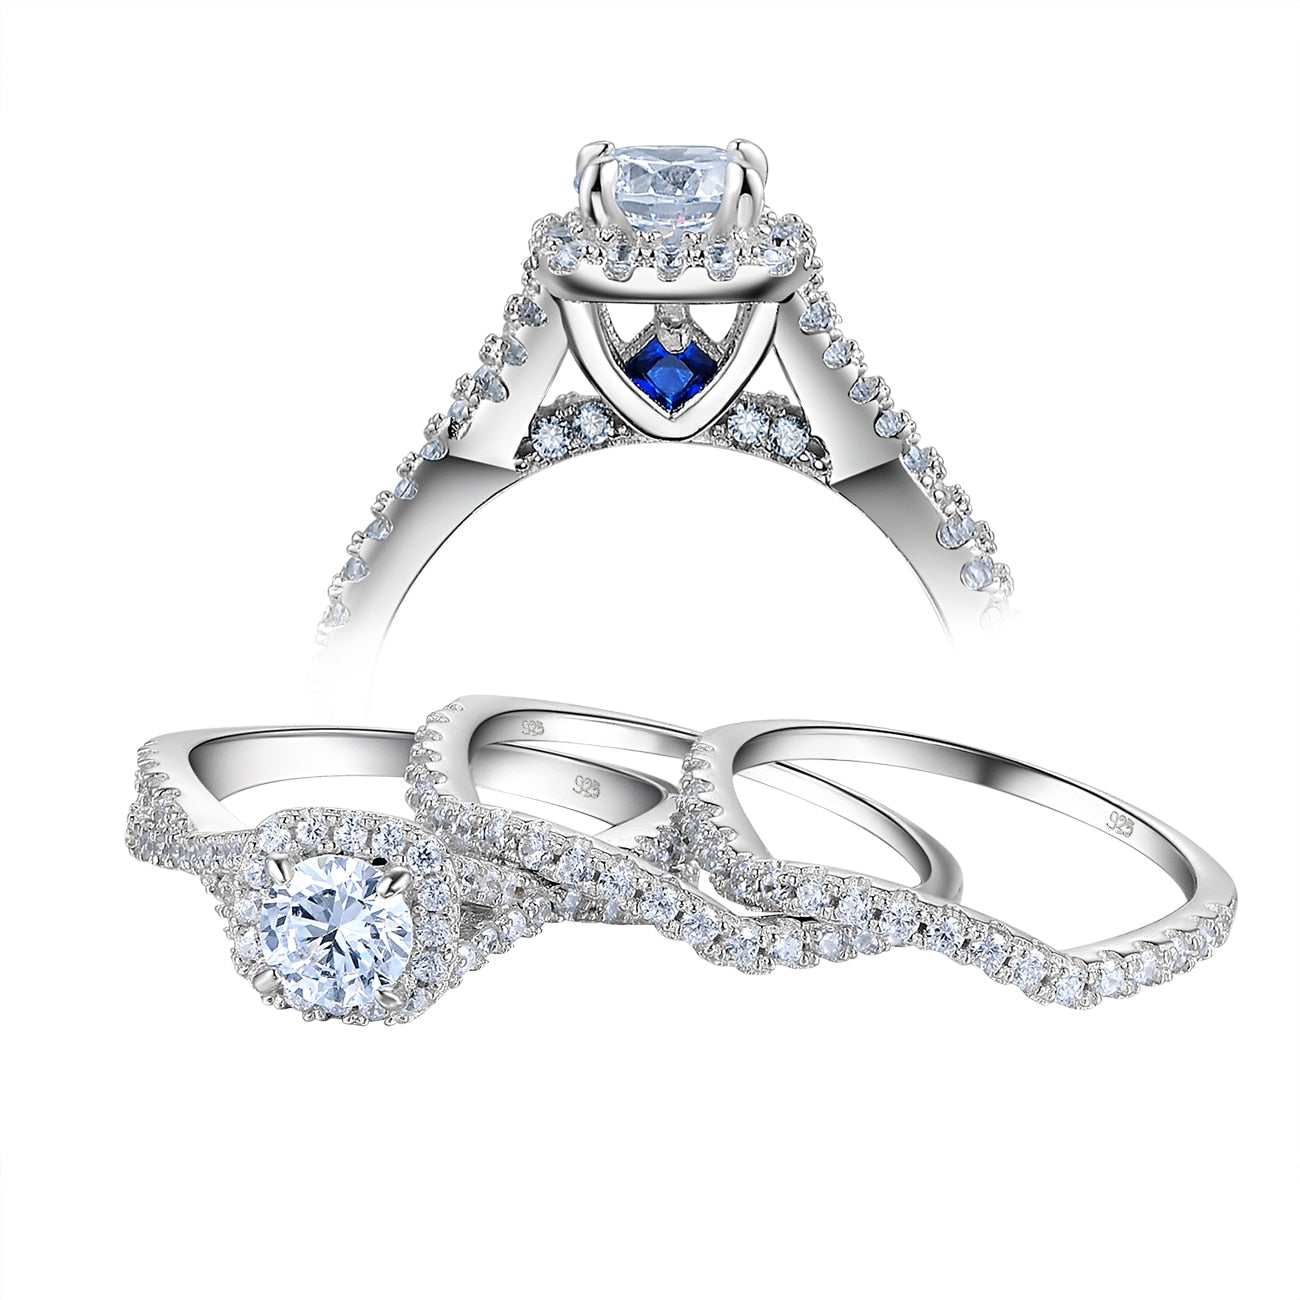 3 Pieces Engagement Ring Set for Women Solid 925 Sterling Silver Round Cut AAAAA CZ Blue Crystal Wedding Bands